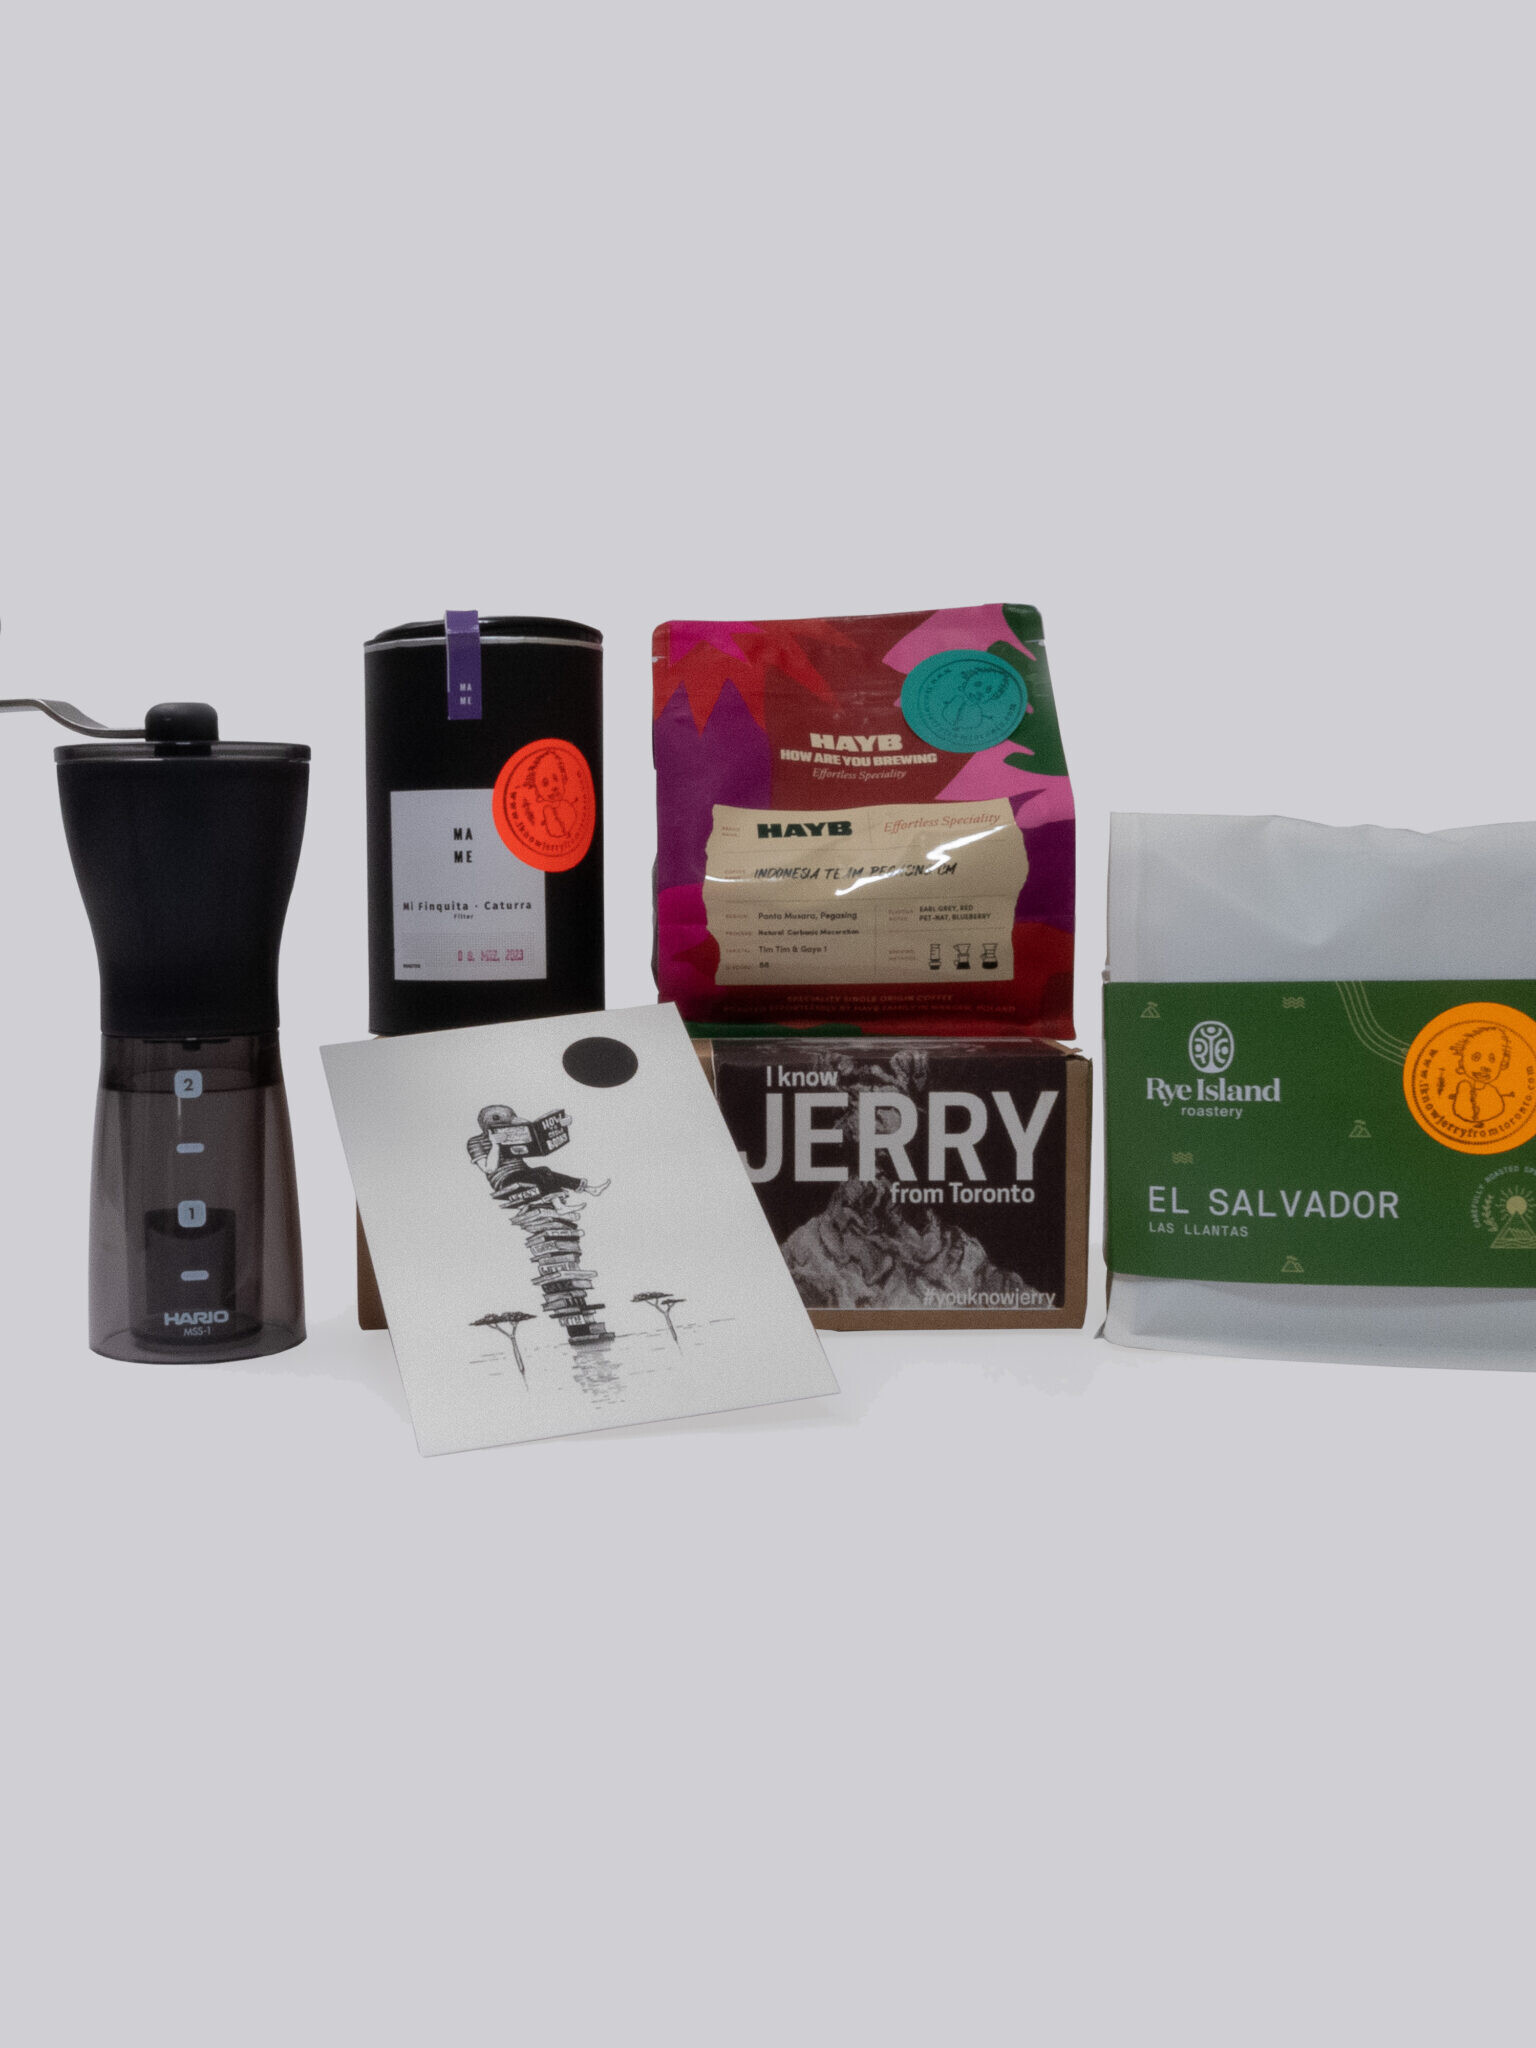 Packshot of the Grinder Box with coffee from Hayb, Rye Island, Mame and an artwork of Gijs Vanhee and a grinder from Hario